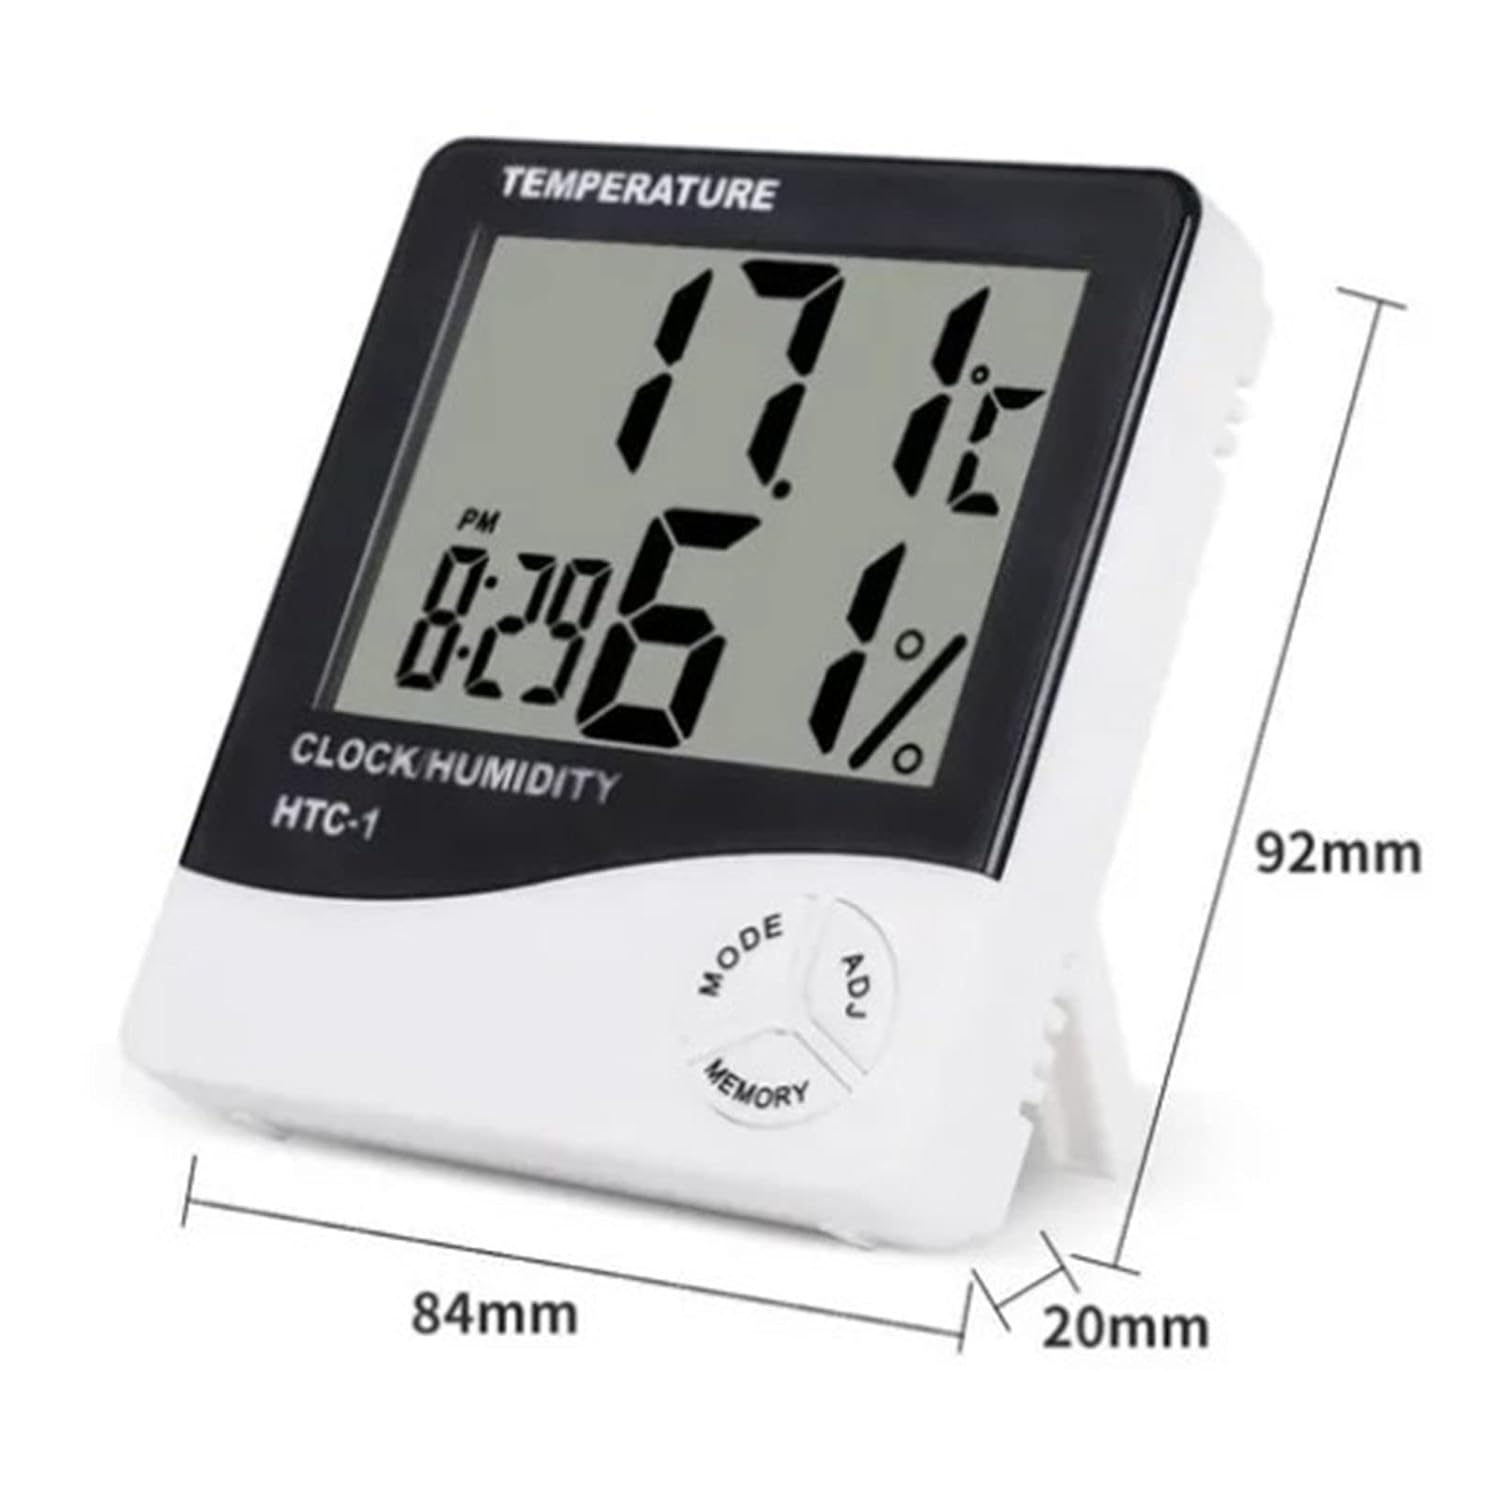 Mini Small Digital Hygrometer Thermometer Indoor, Accurate Humidity Meter Temperature Sensor for Home, Bedroom, Baby Room, Office, Greenhouse, Cellar